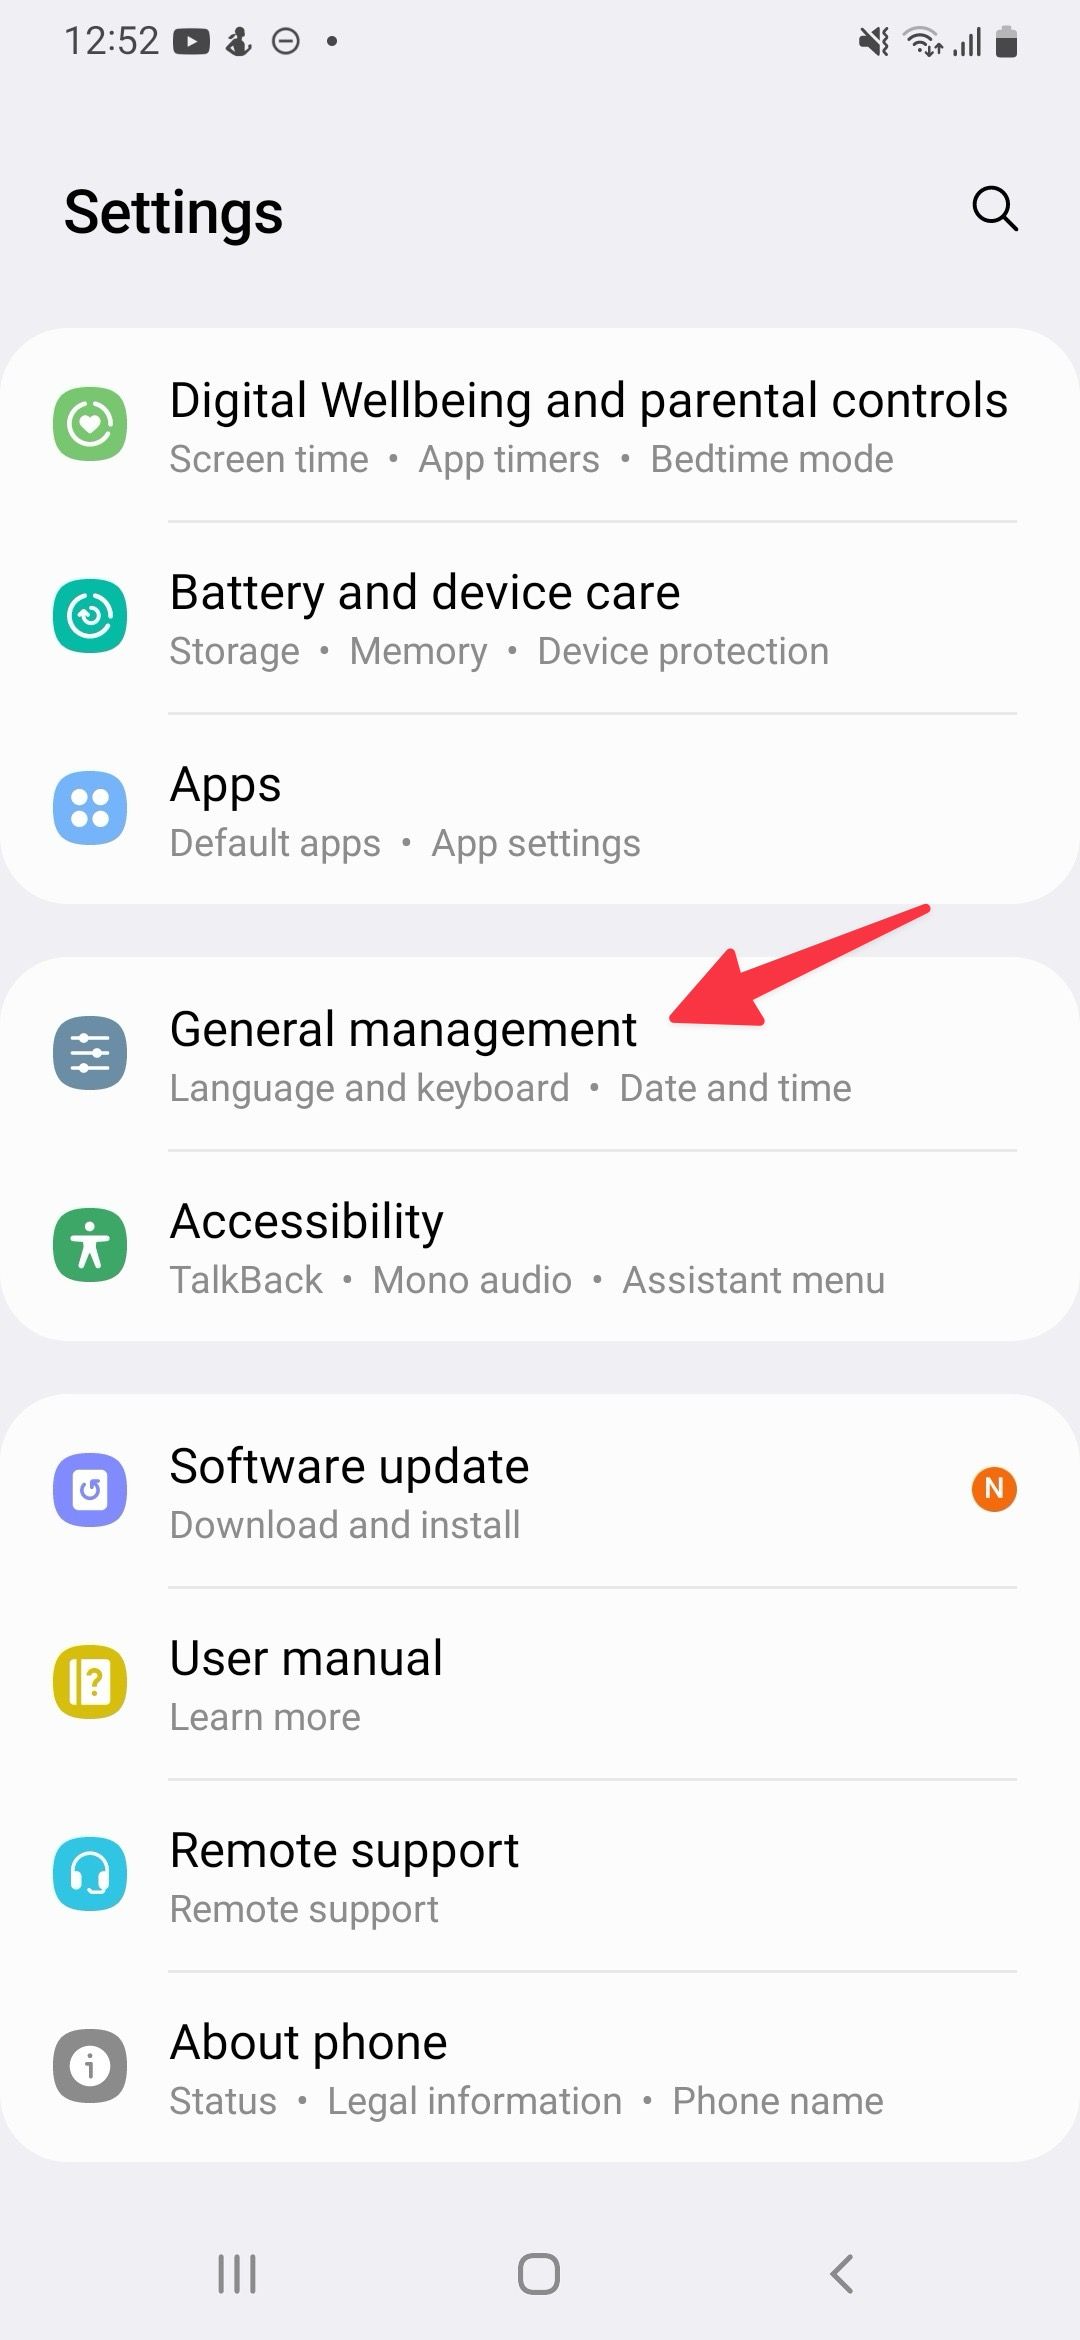 General management on Samsung settings